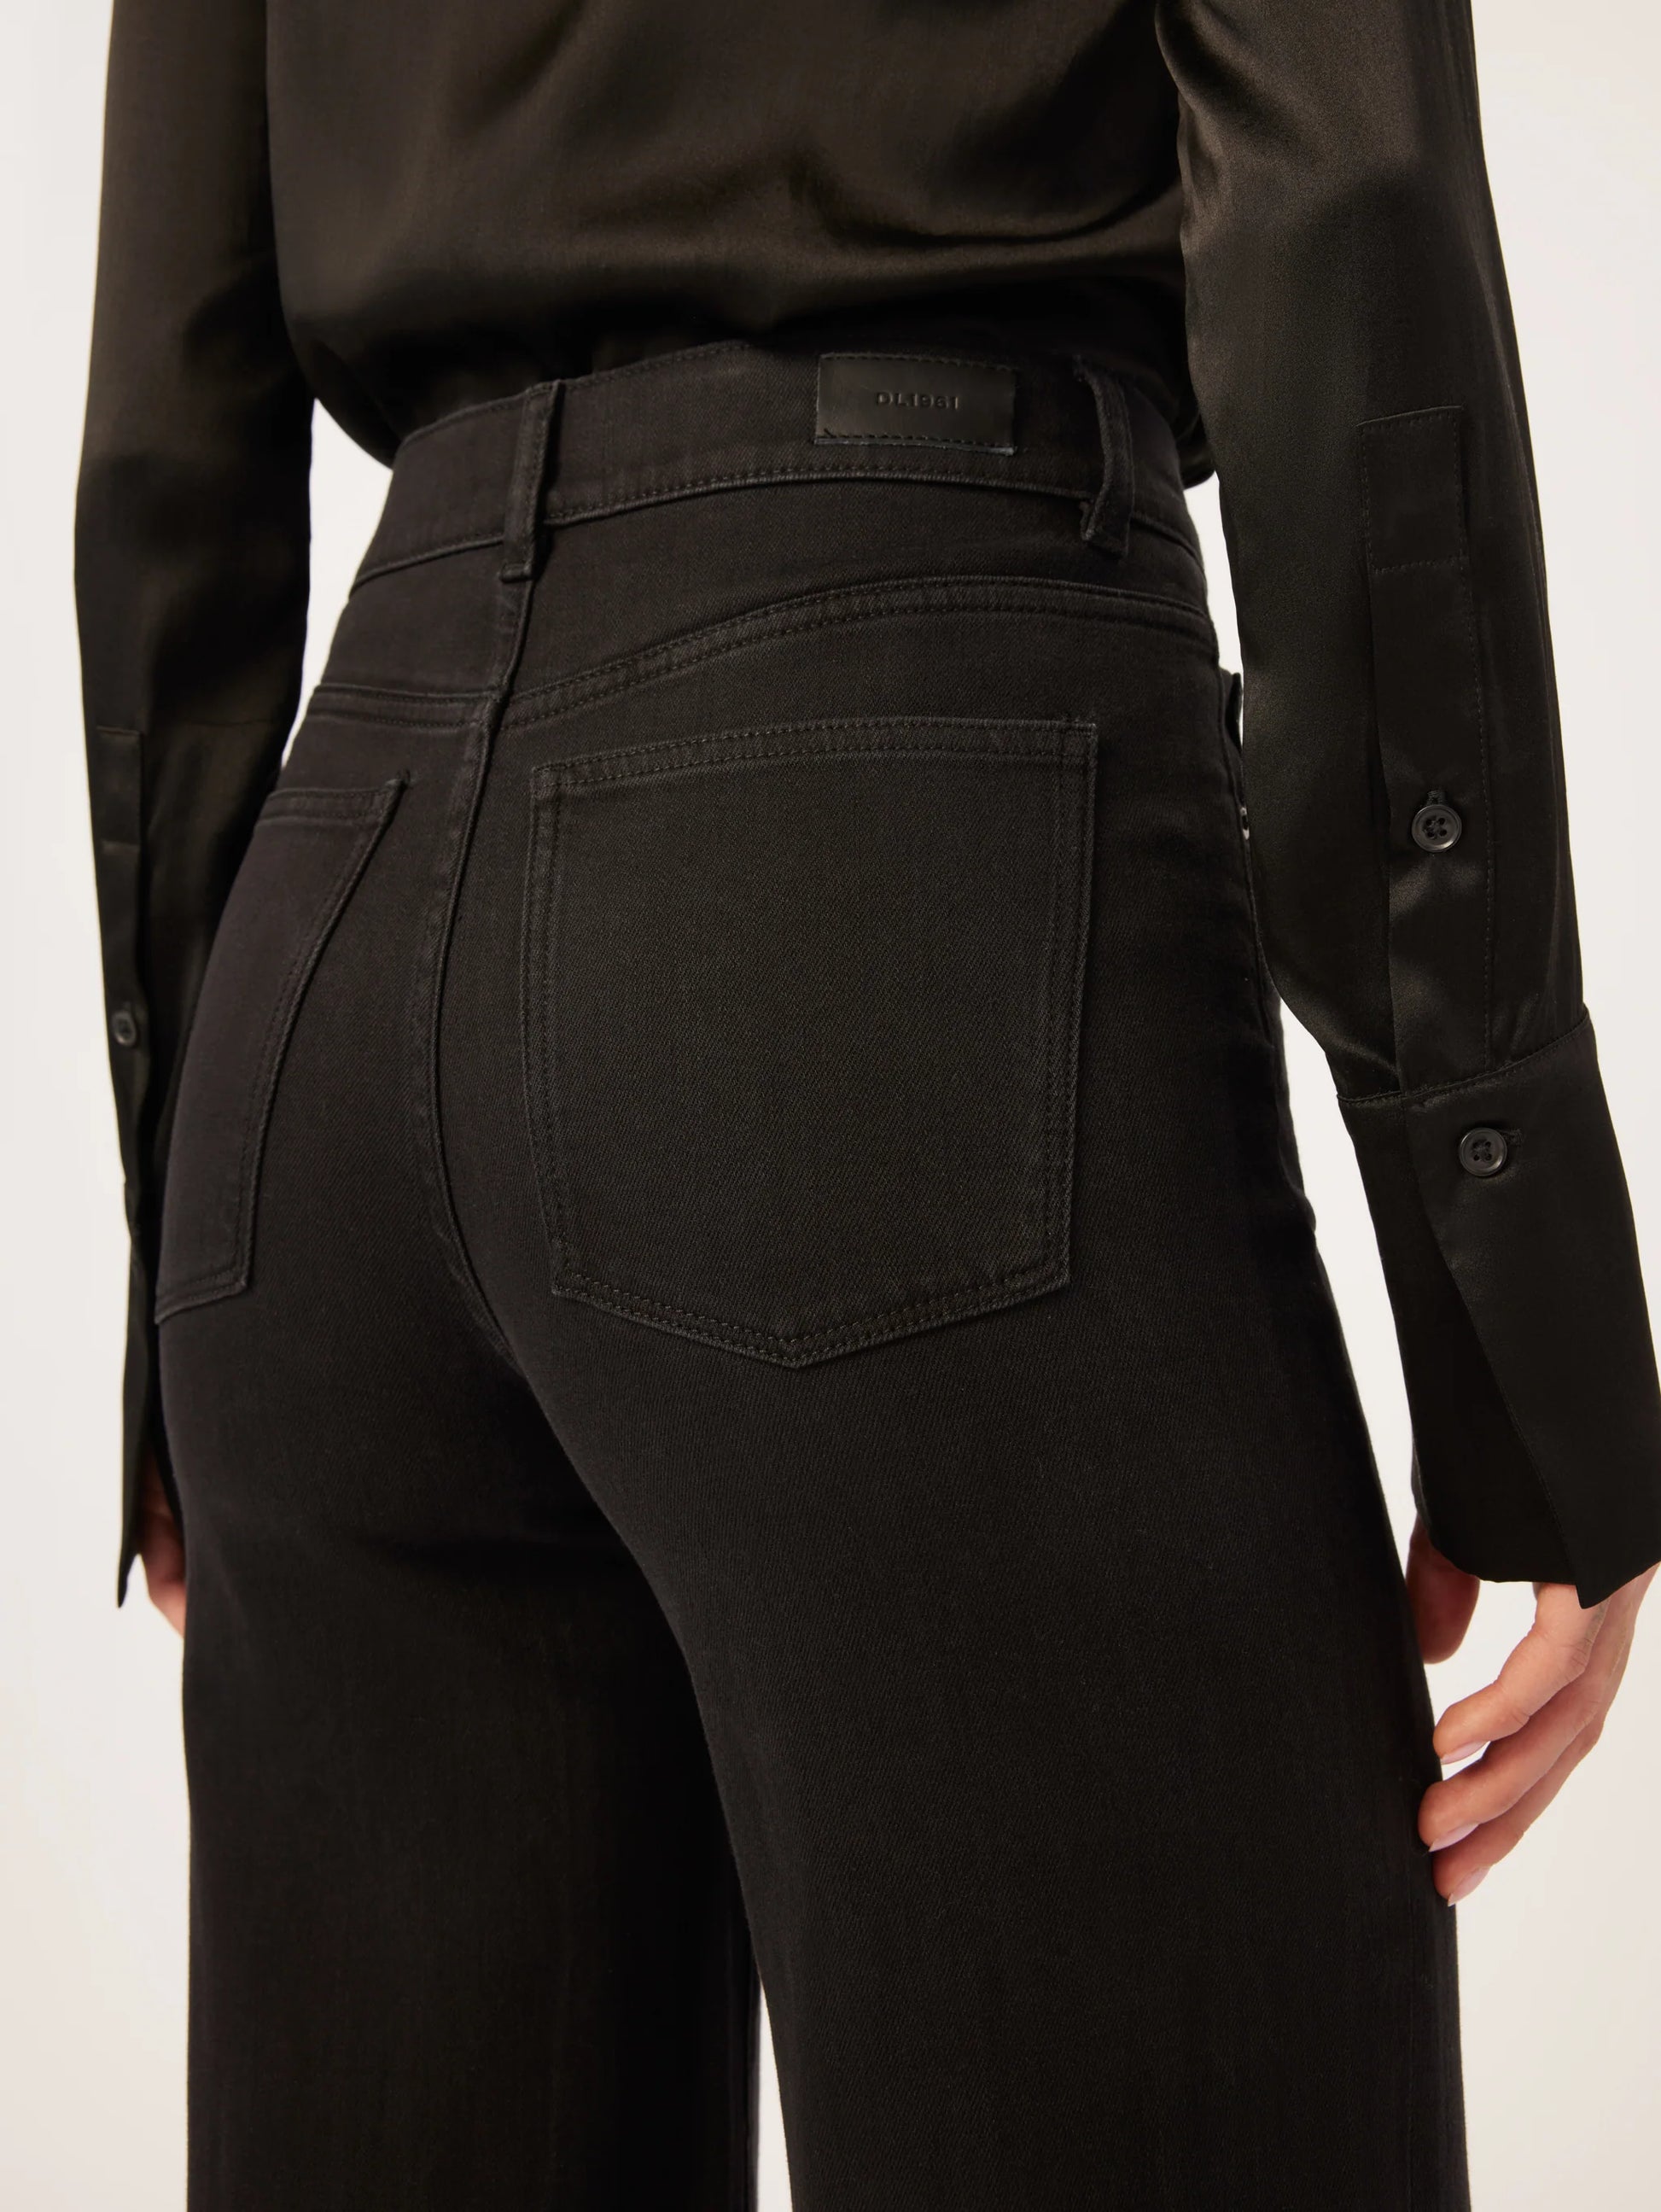 The back view of a woman in DL1961 Hepburn Wide Leg - Jet Black jeans.